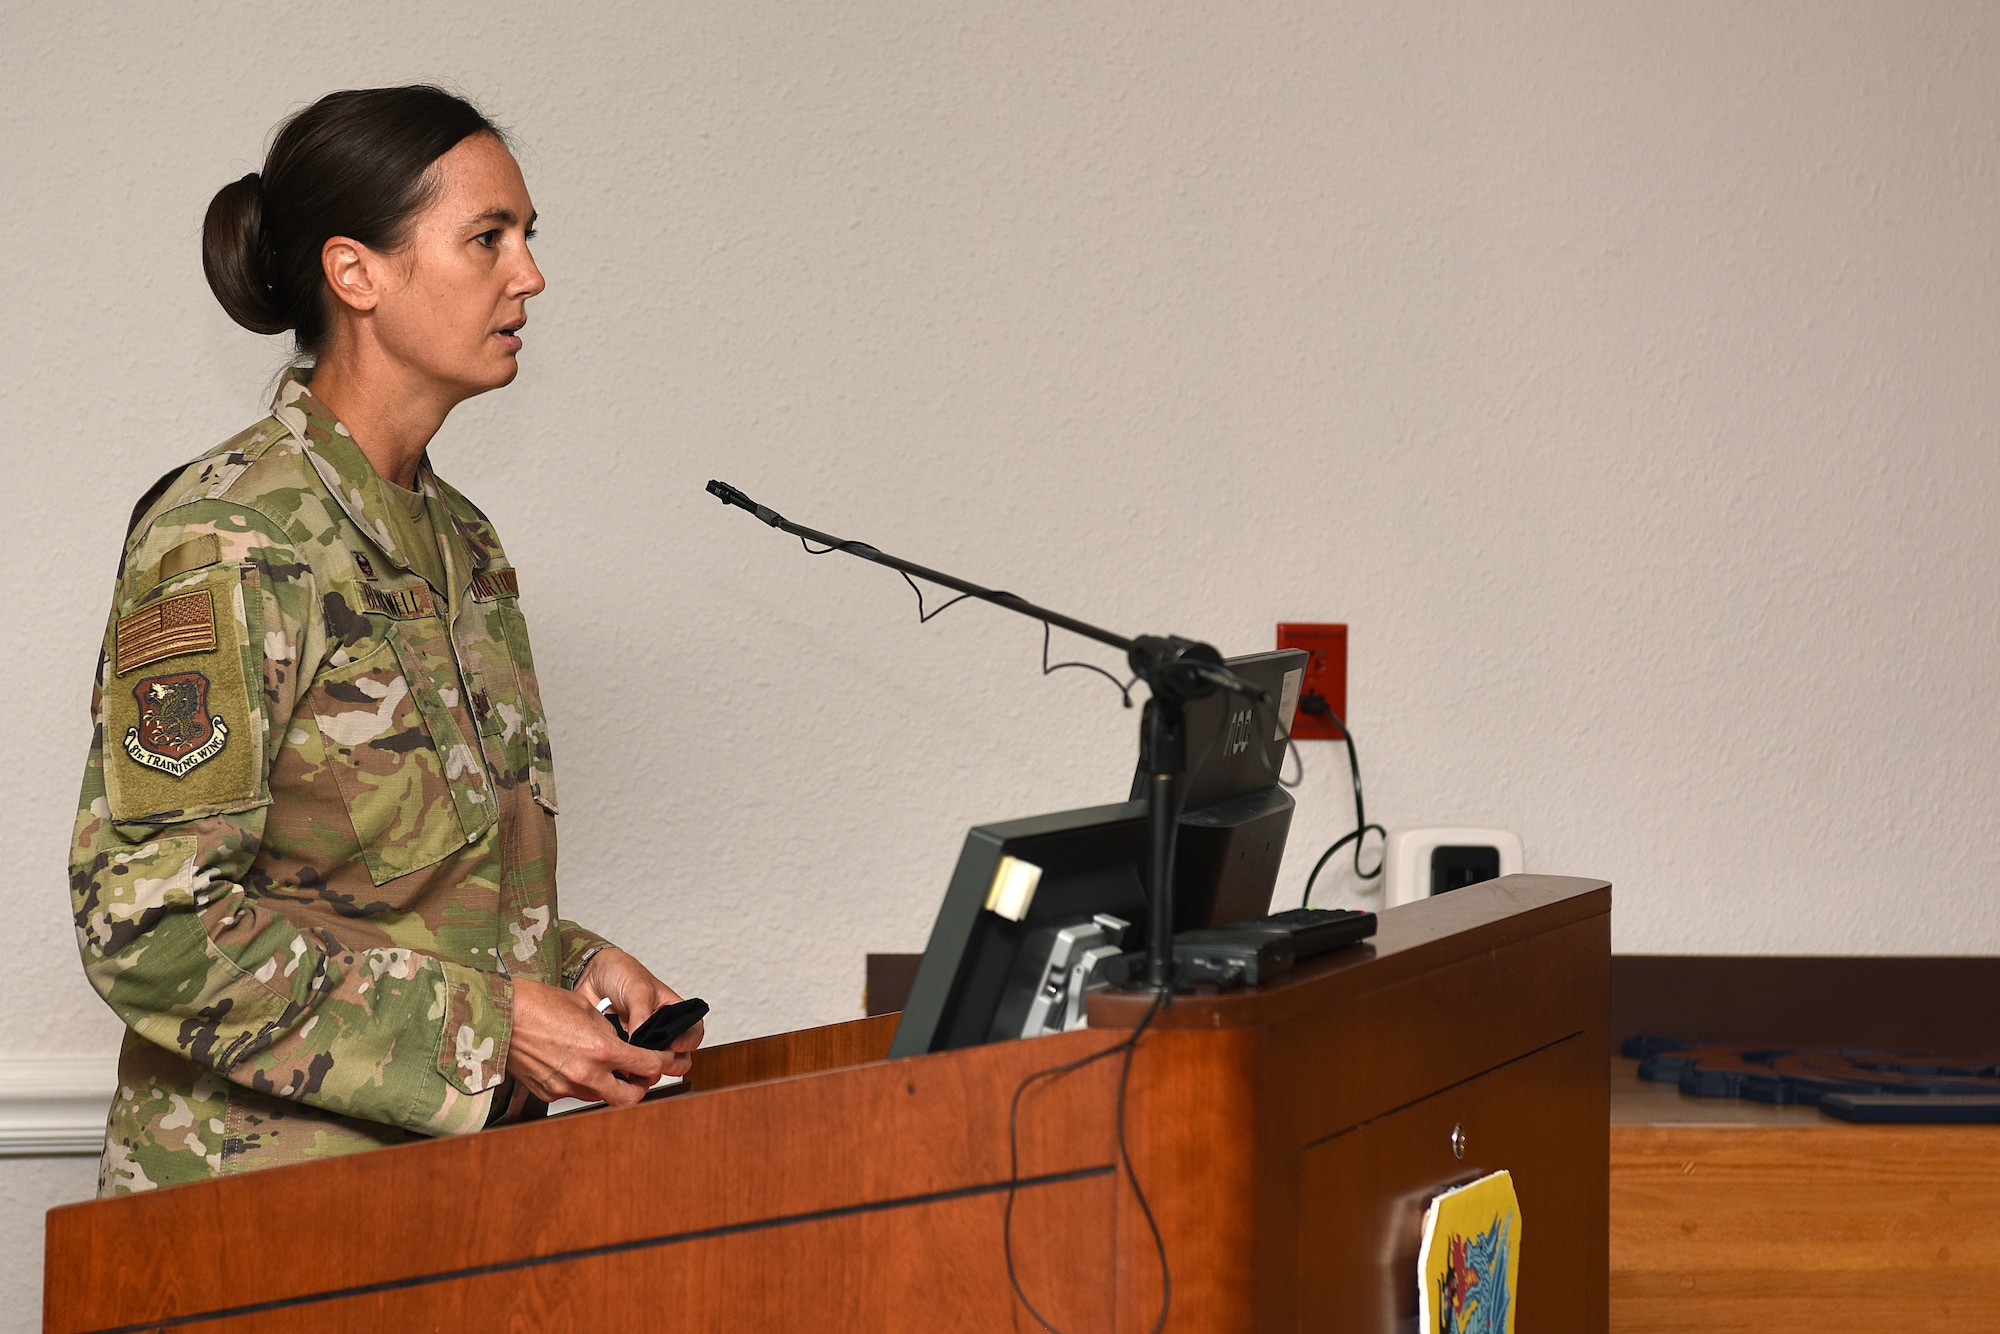 U.S. Air Force Col. Heather Blackwell, 81st Training Wing commander, delivers remarks during the 81st Medical Group change of command ceremony inside the Don Wiley Auditorium at Keesler Air Force Base, Mississippi, July 21, 2020. Col. Beatrice Dolihite, outgoing 81st MDG commander, relinquished command to Col. Christopher Estridge, incoming 81st MDG commander. (U.S. Air Force photo by Senior Airman Suzie Plotnikov)